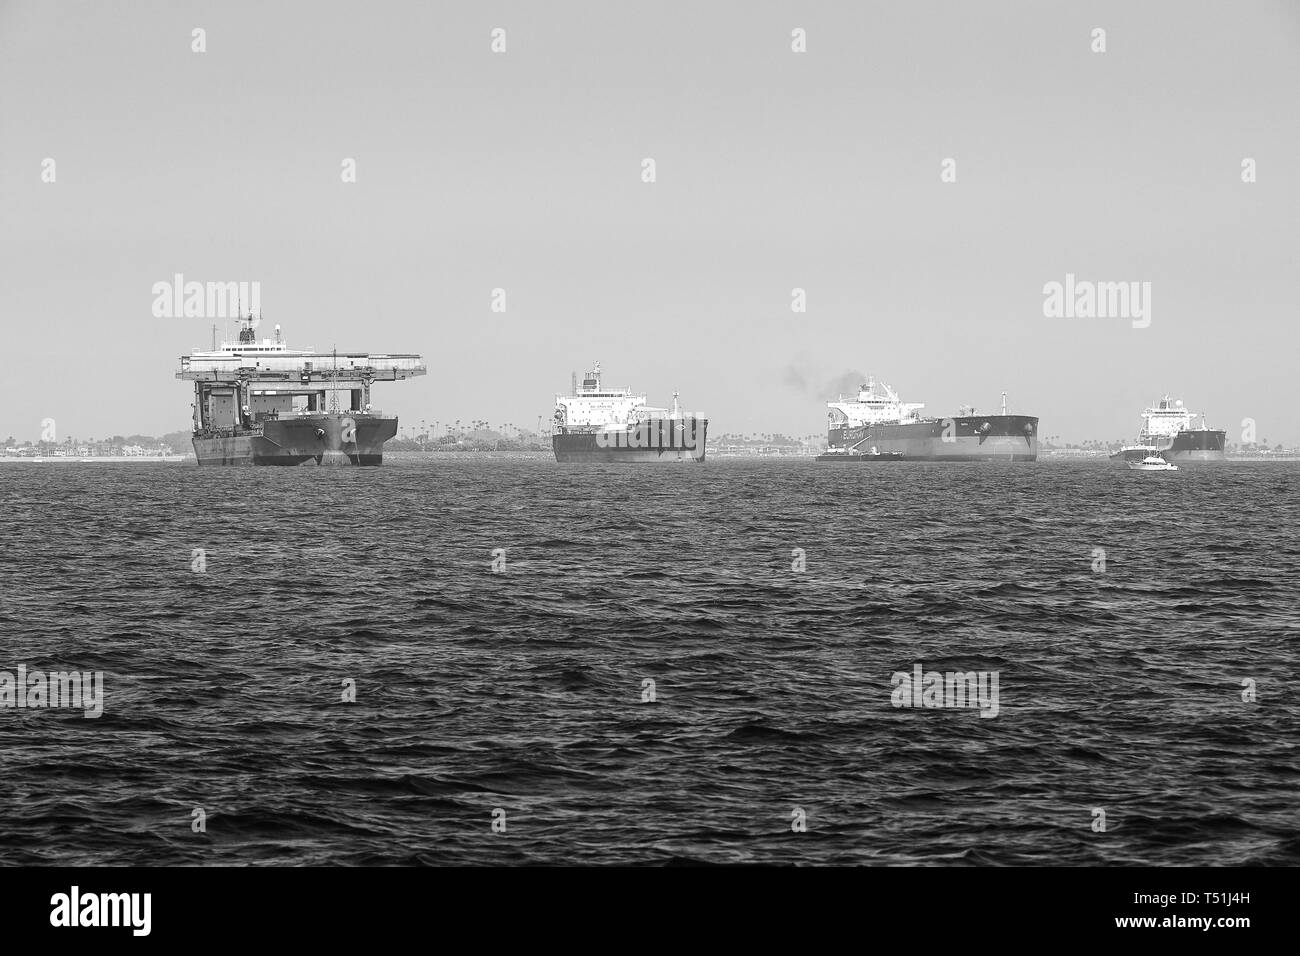 Black And White Photo Of Specialist Open-Hatch Gantry Vessel, SAGA Horizon, With Other Cargo Ships, Anchored In The Port of Long Beach, California. Stock Photo